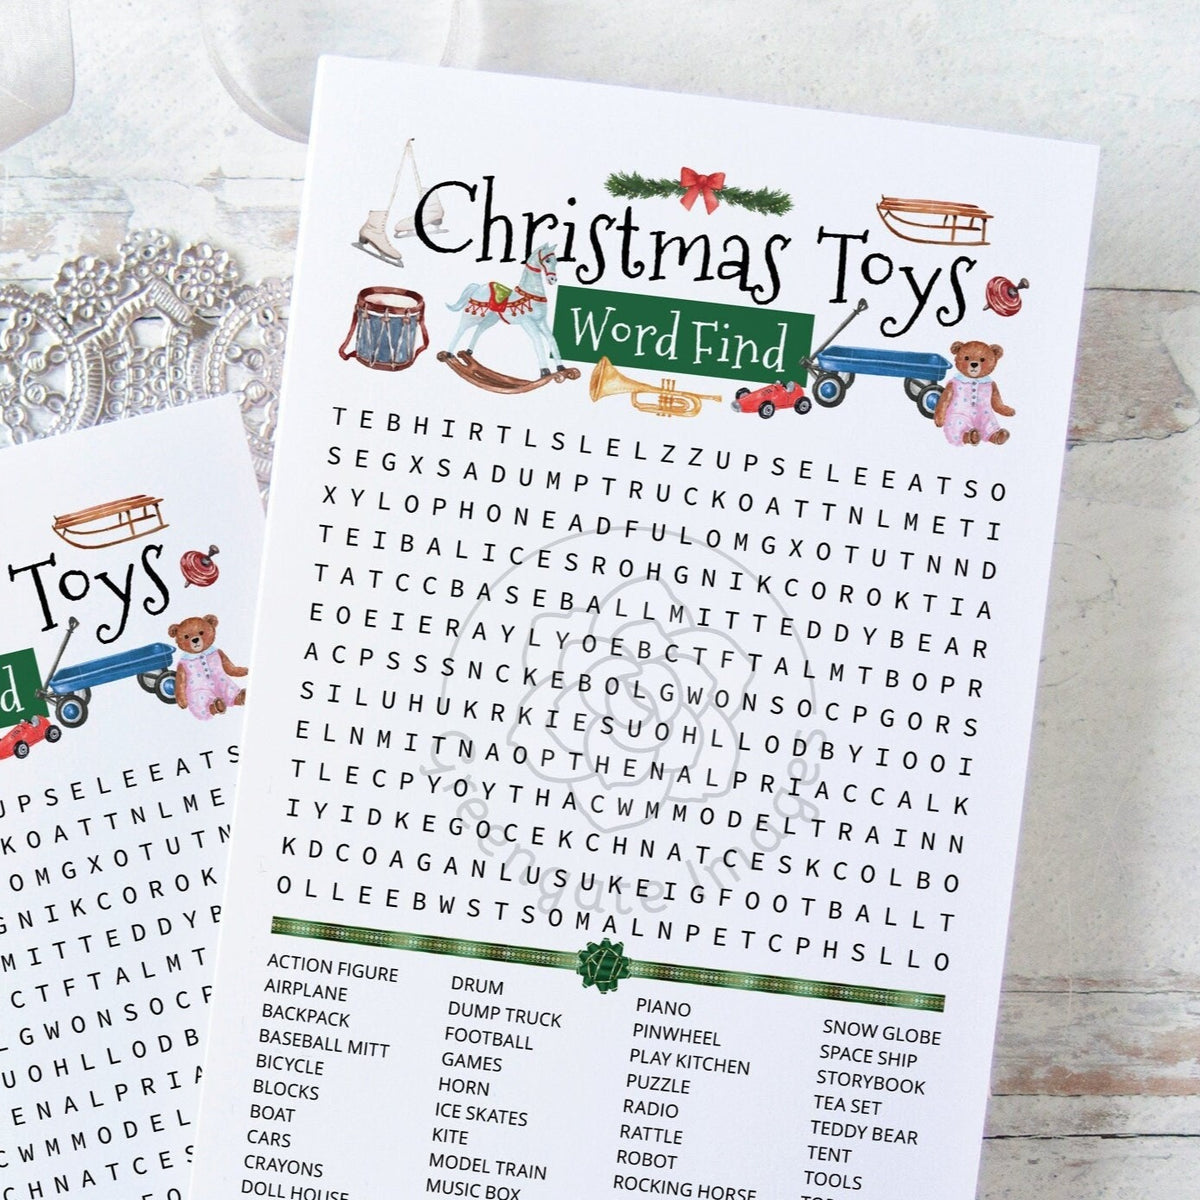 Christmas Toys Word Find – Greengate Images